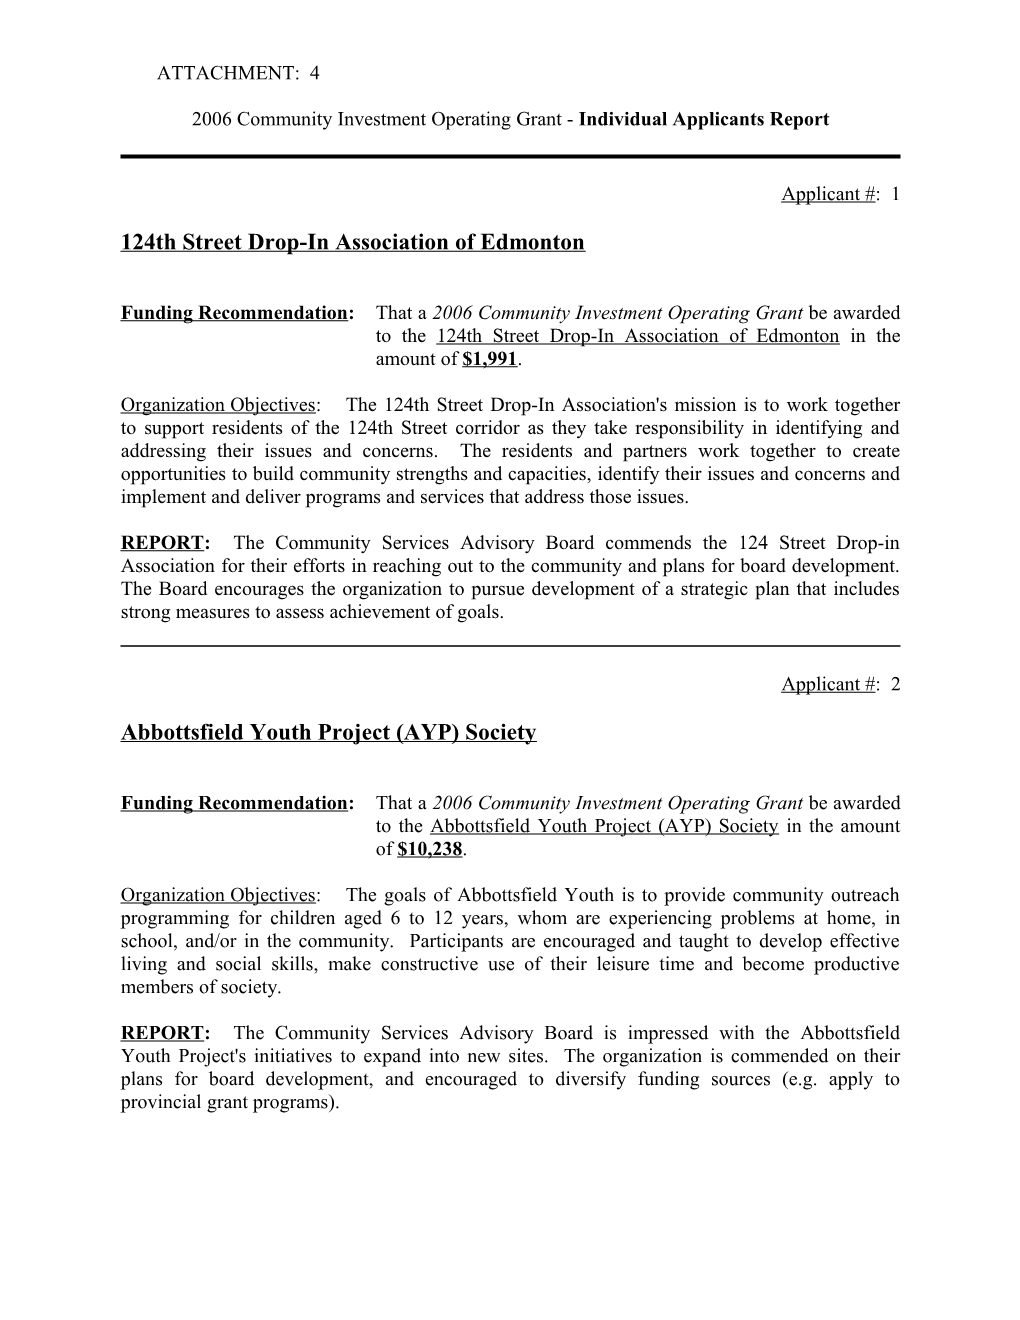 Report for City Council April 25, 2006 Meeting